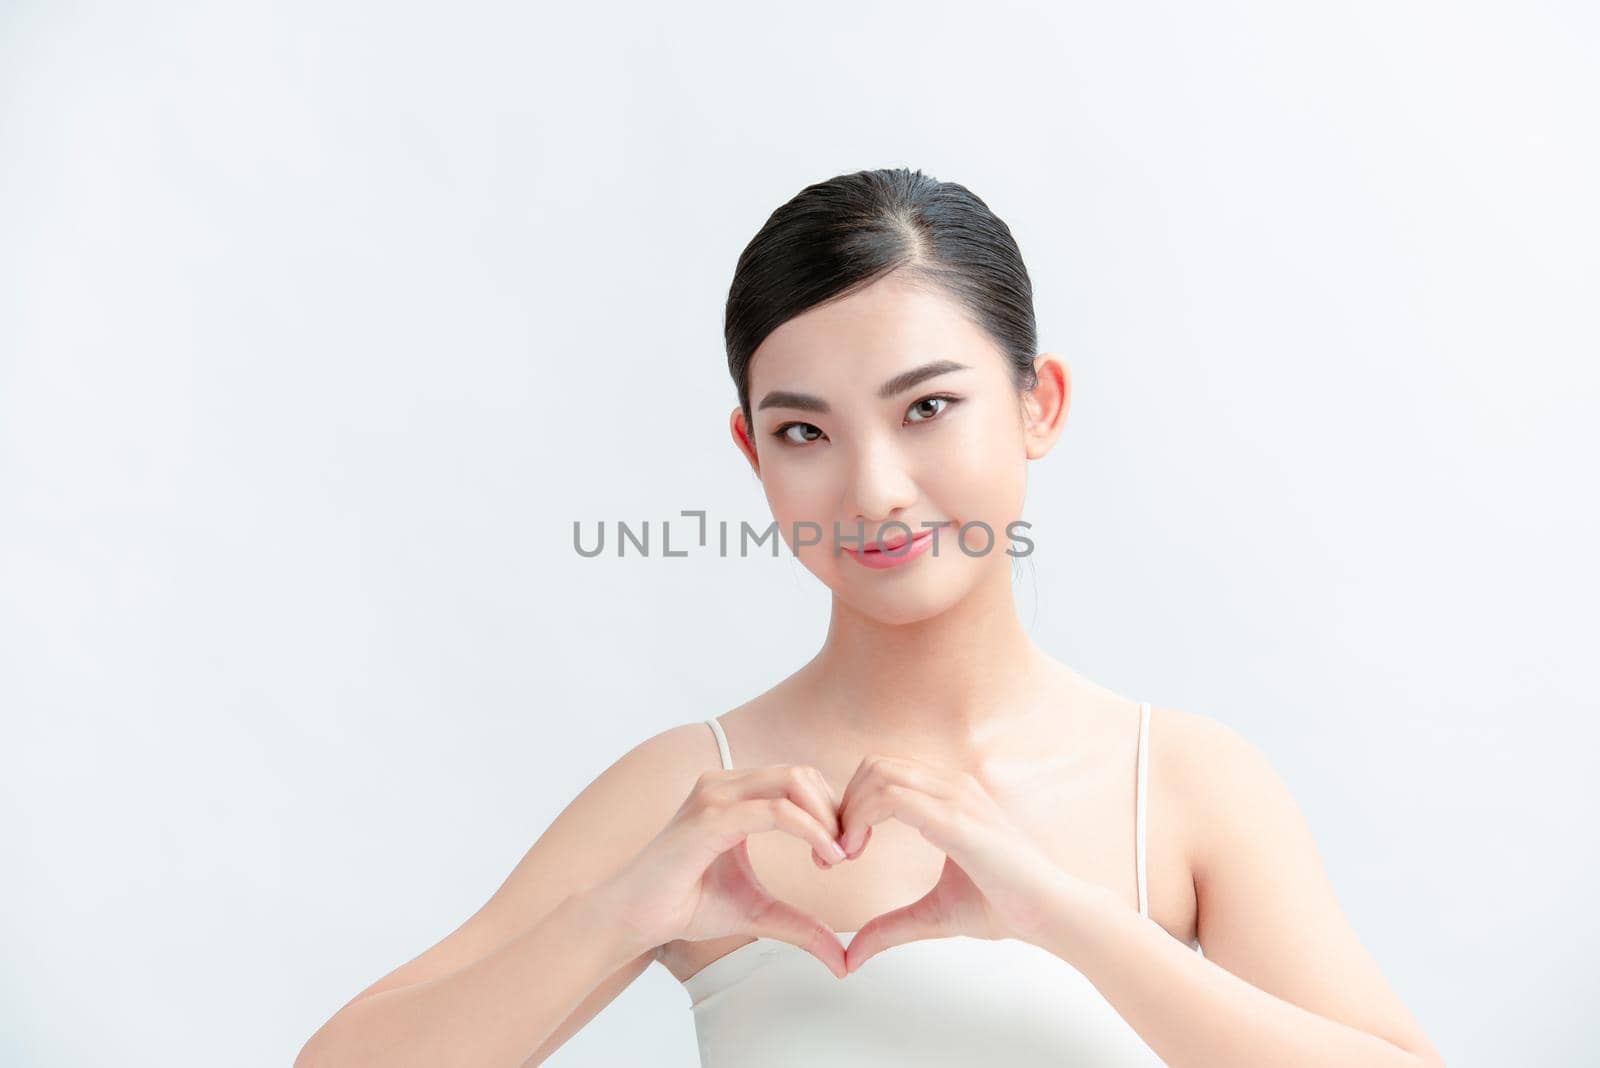 Portrait of woman showing heart figure sign with hands near chest isolated